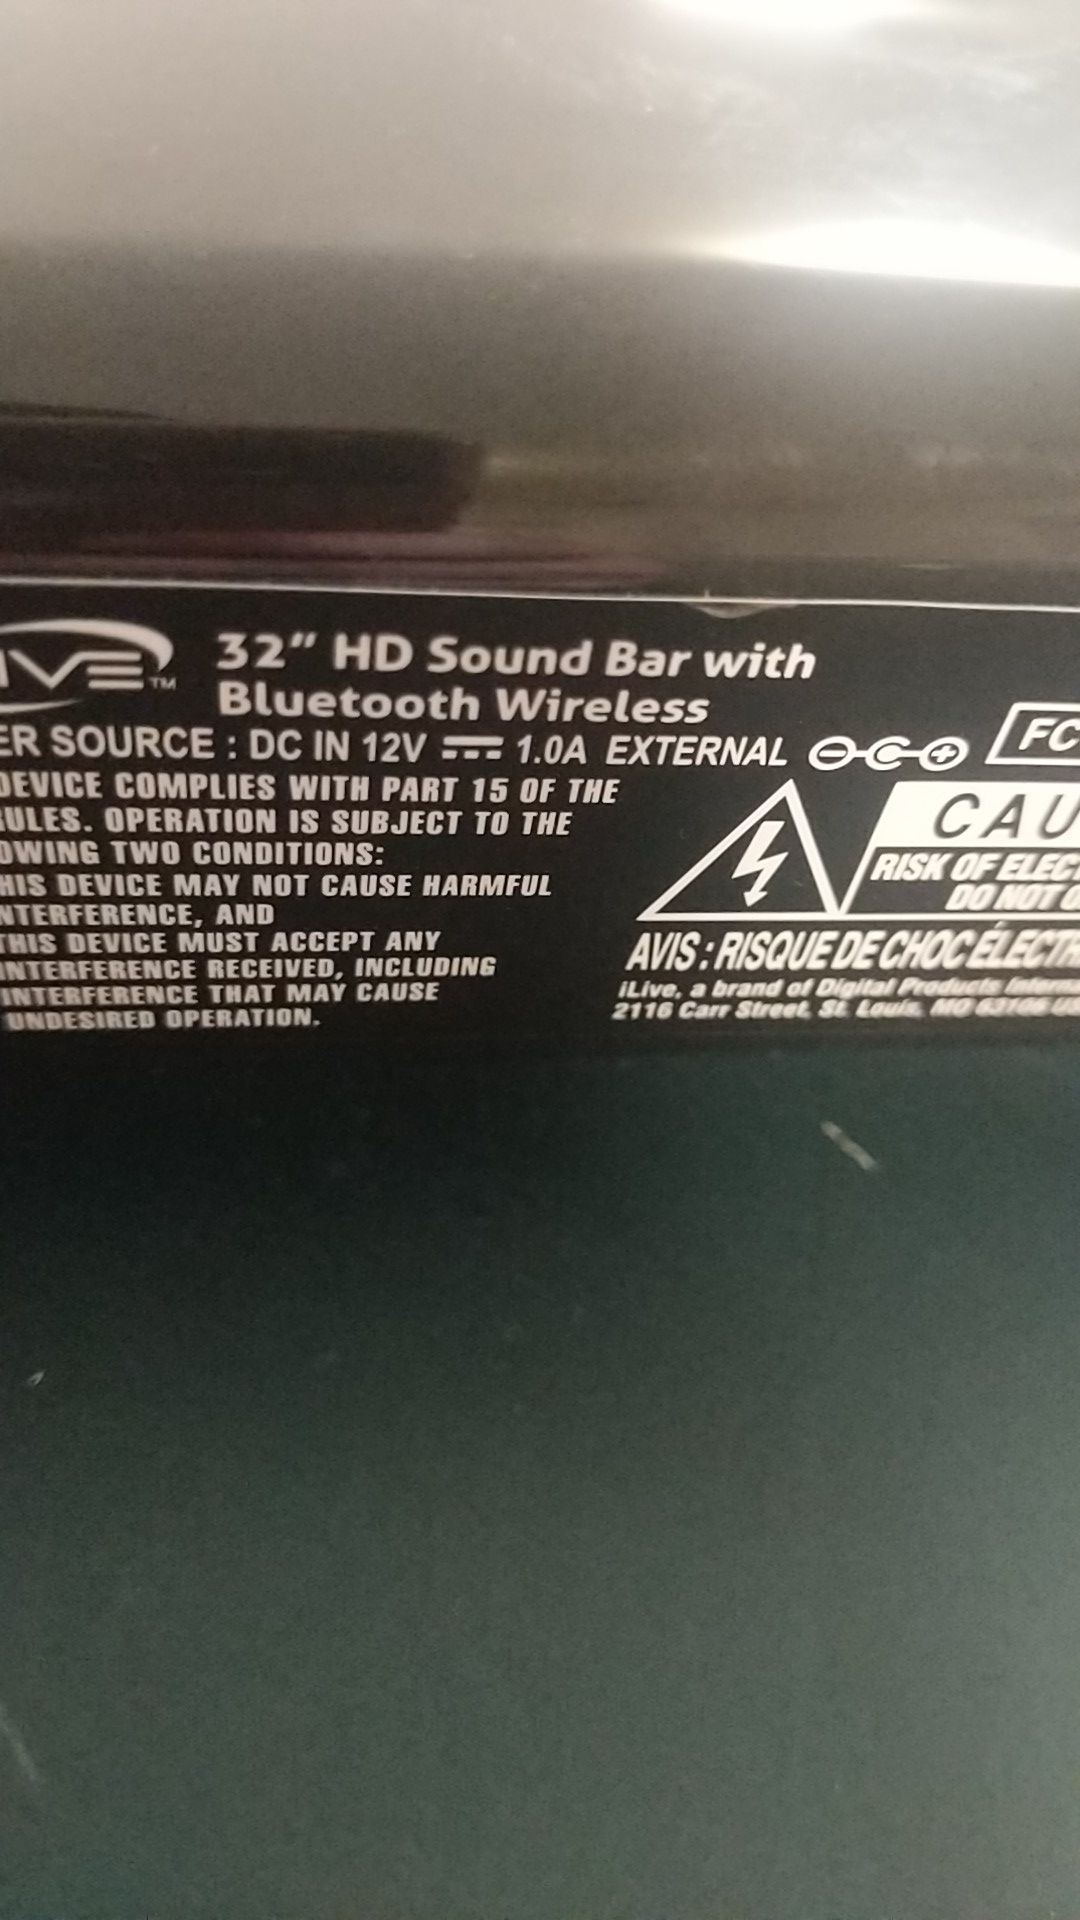 sound bar HD iLive 32 in. w/ Bluetooth connection